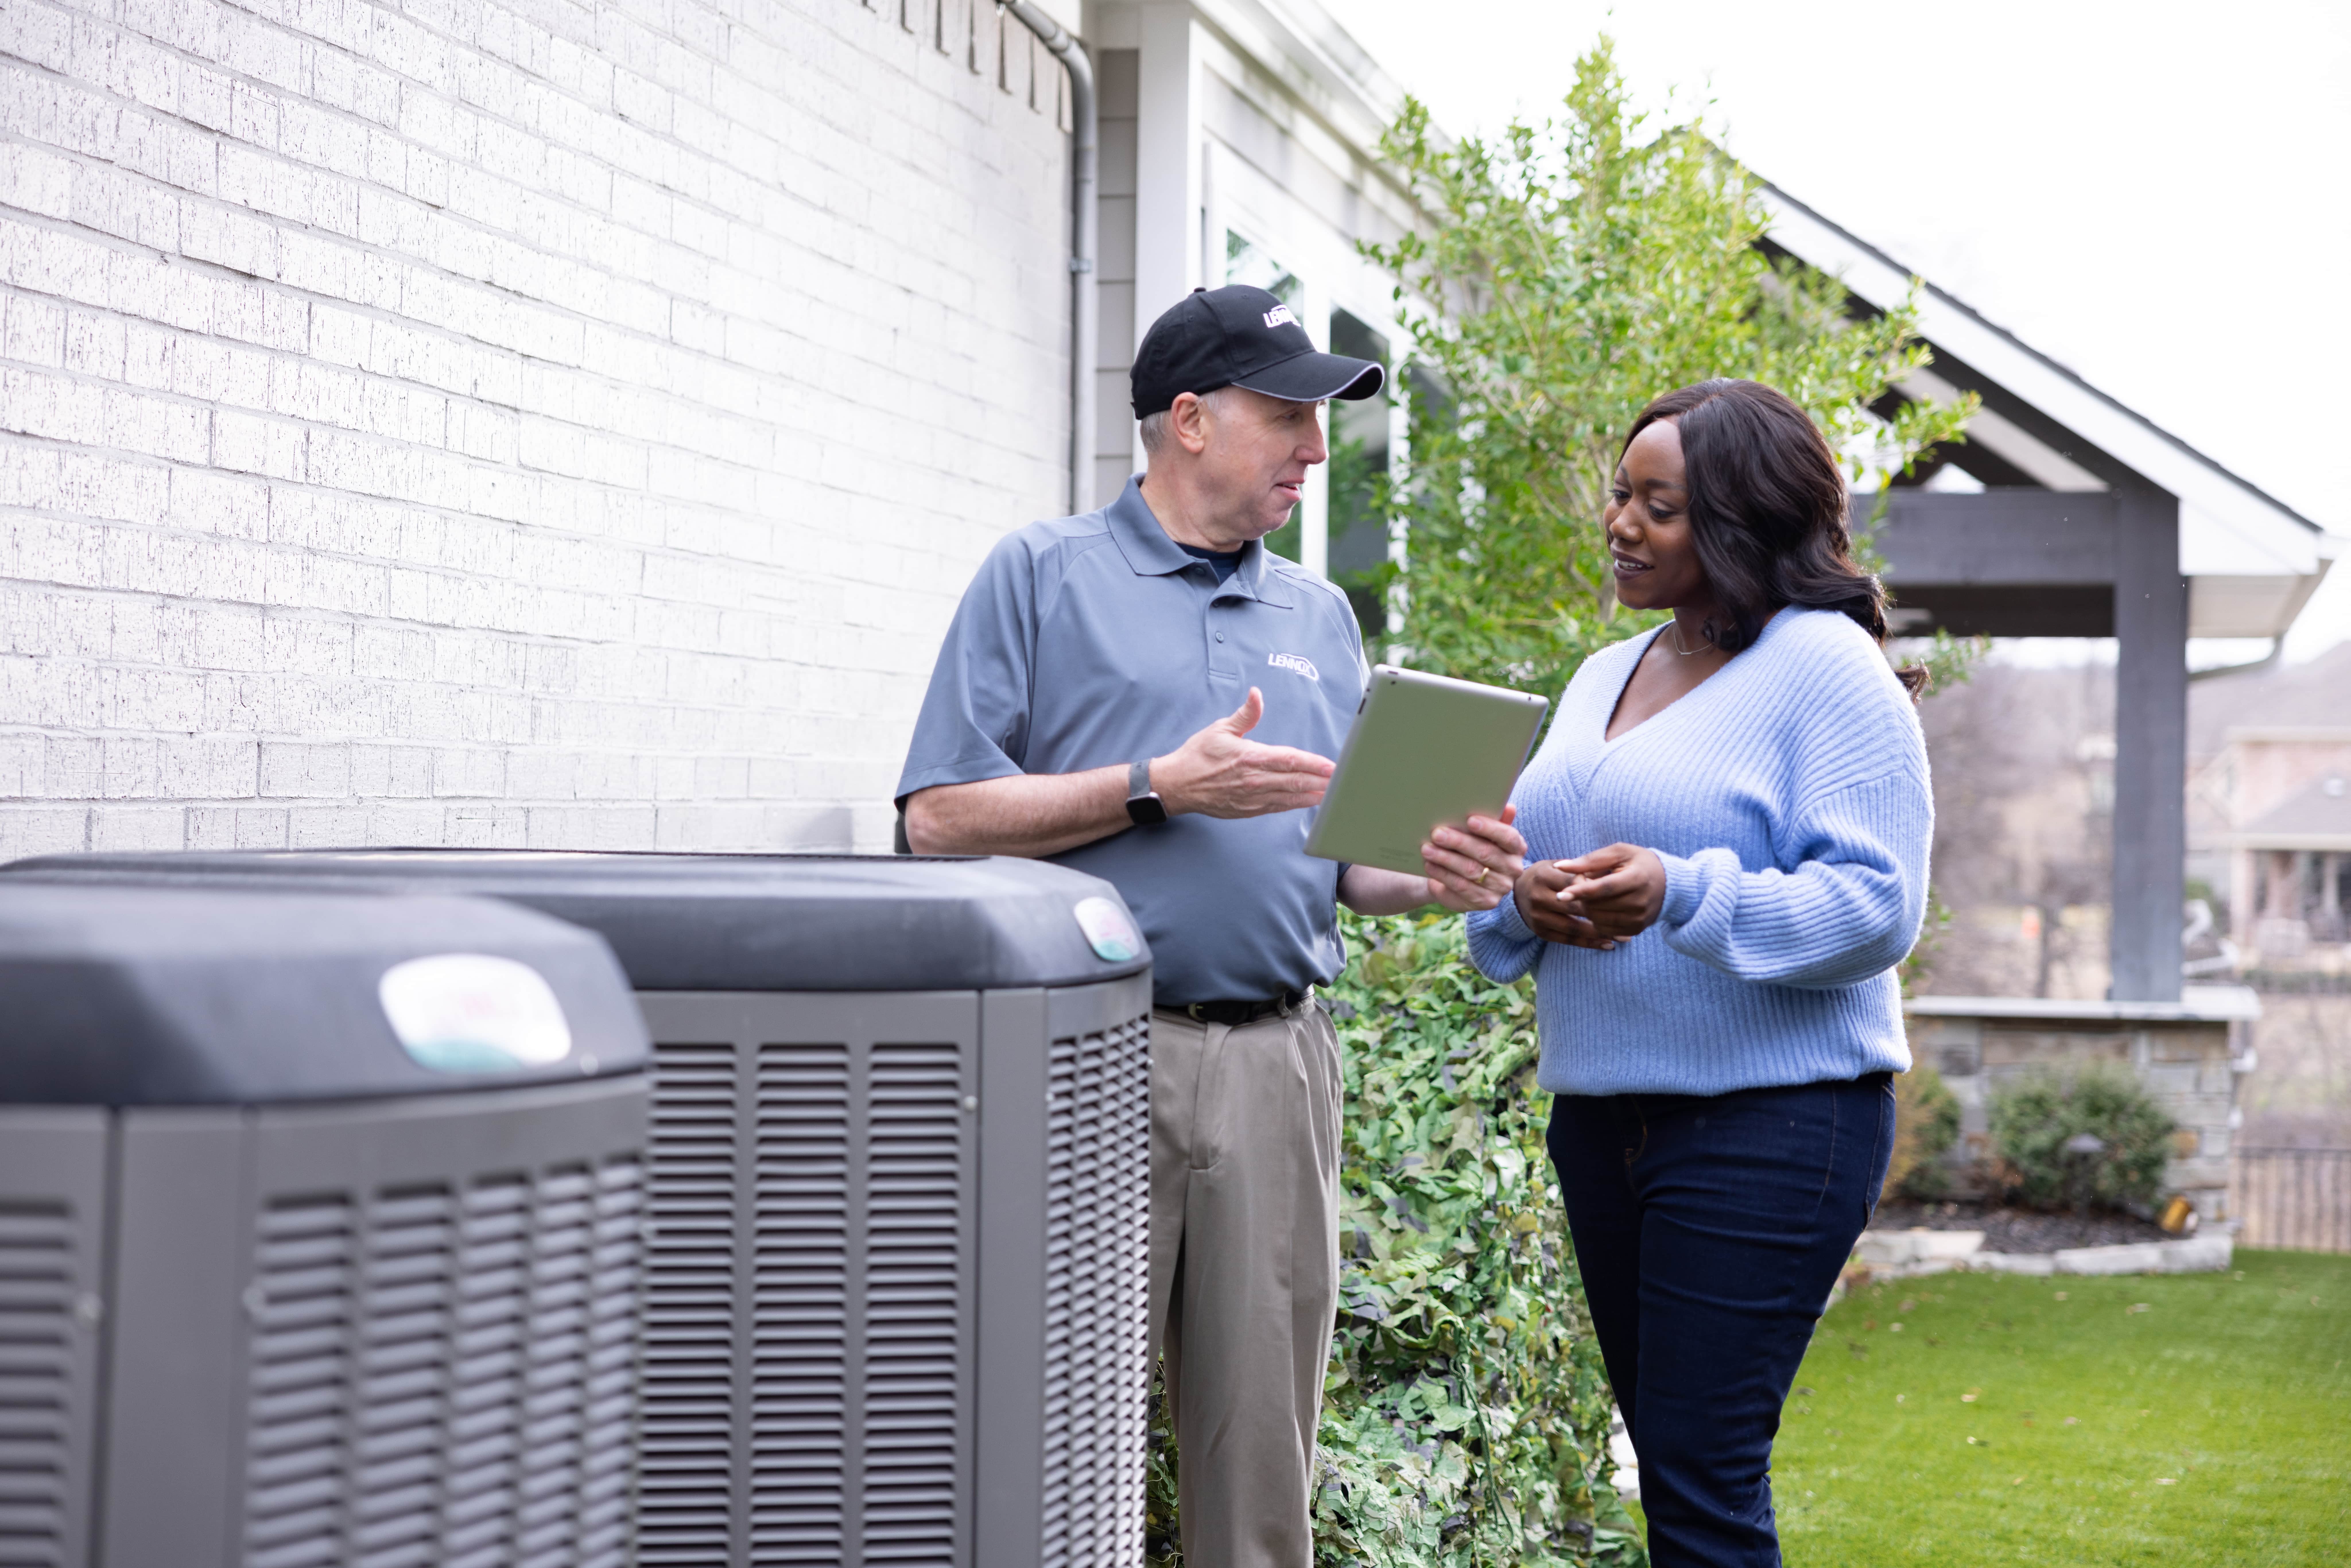 Service worker conversion with homeowner outside near A/C units